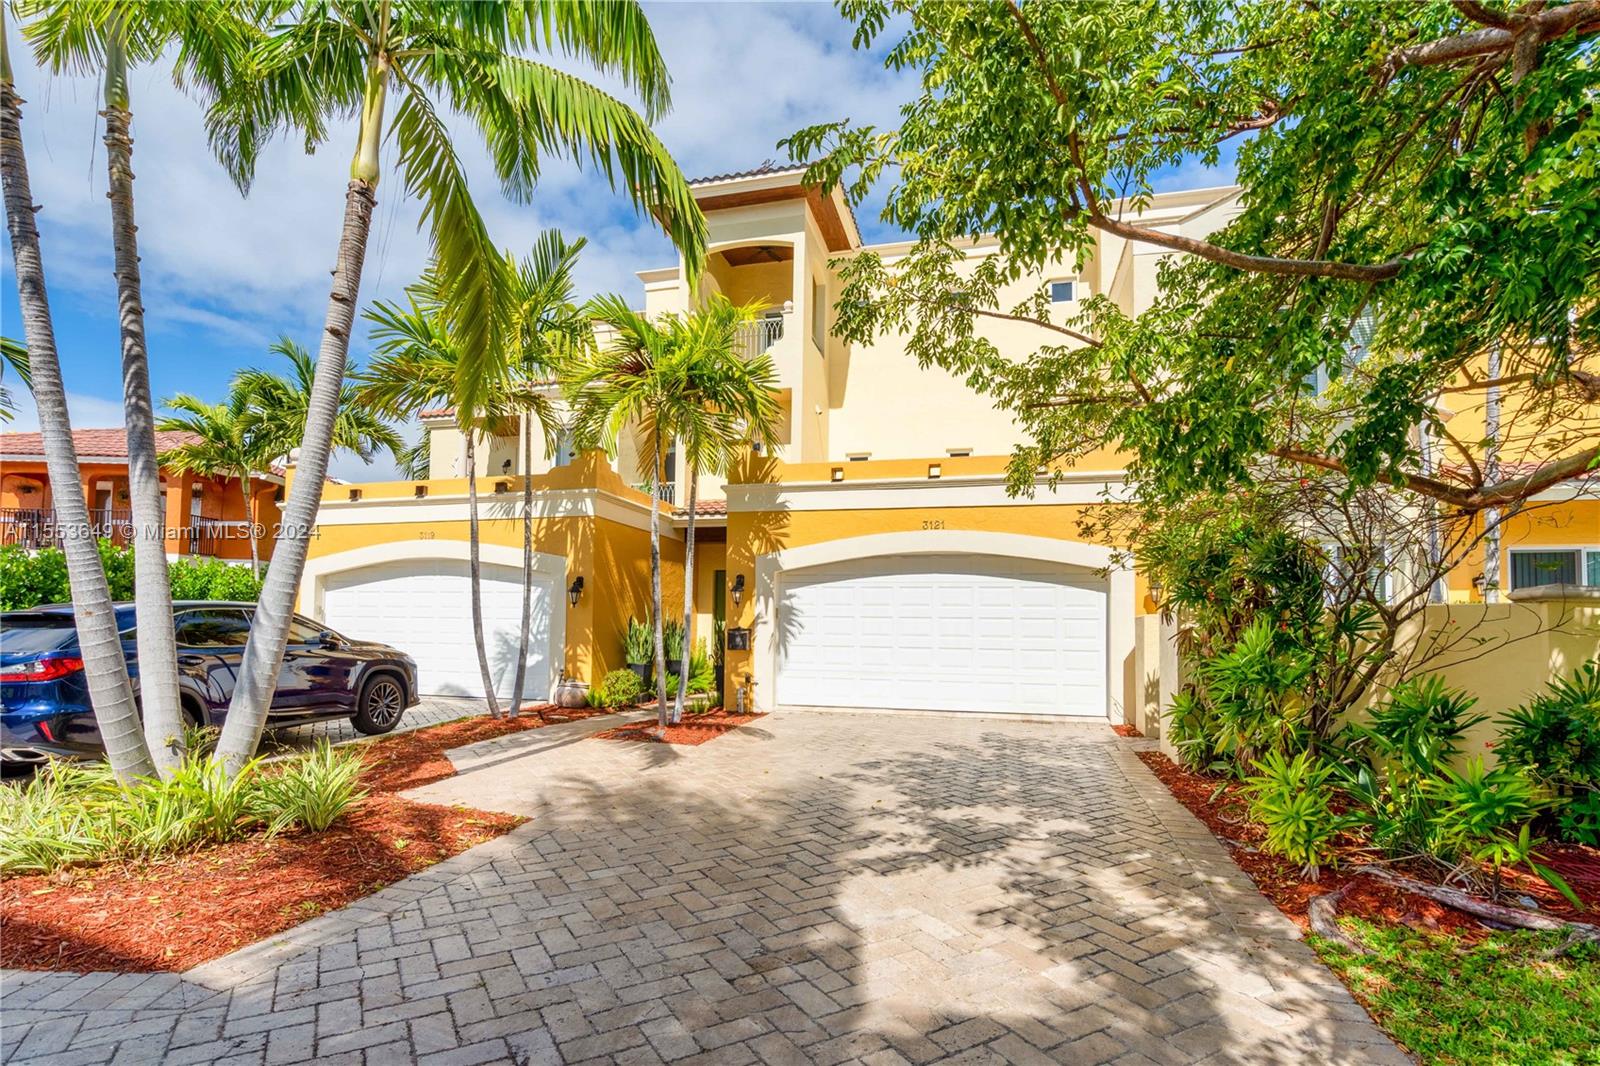 One of a kind townhome in prestigious Dolphin Isles in East Fort Lauderdale. This 3 bedroom, 4 bathroom townhouse has it all! Top of the line tile and hardwood flooring throughout , custom made Italian cabinetry, private elevator, safe room and much more. This townhouse sits right on the Intracoastal and has a dock for your boat. It has a gas fireplace and a range, 3 terraces, 2 master suites and 2 car garage that is climate controlled, Tesla charger, and the list goes on. Sitting right across from the beach, it does not get better than this! PRICE IS NEGOTIABLE. PROPERTY IS FOR RENT and SALE.